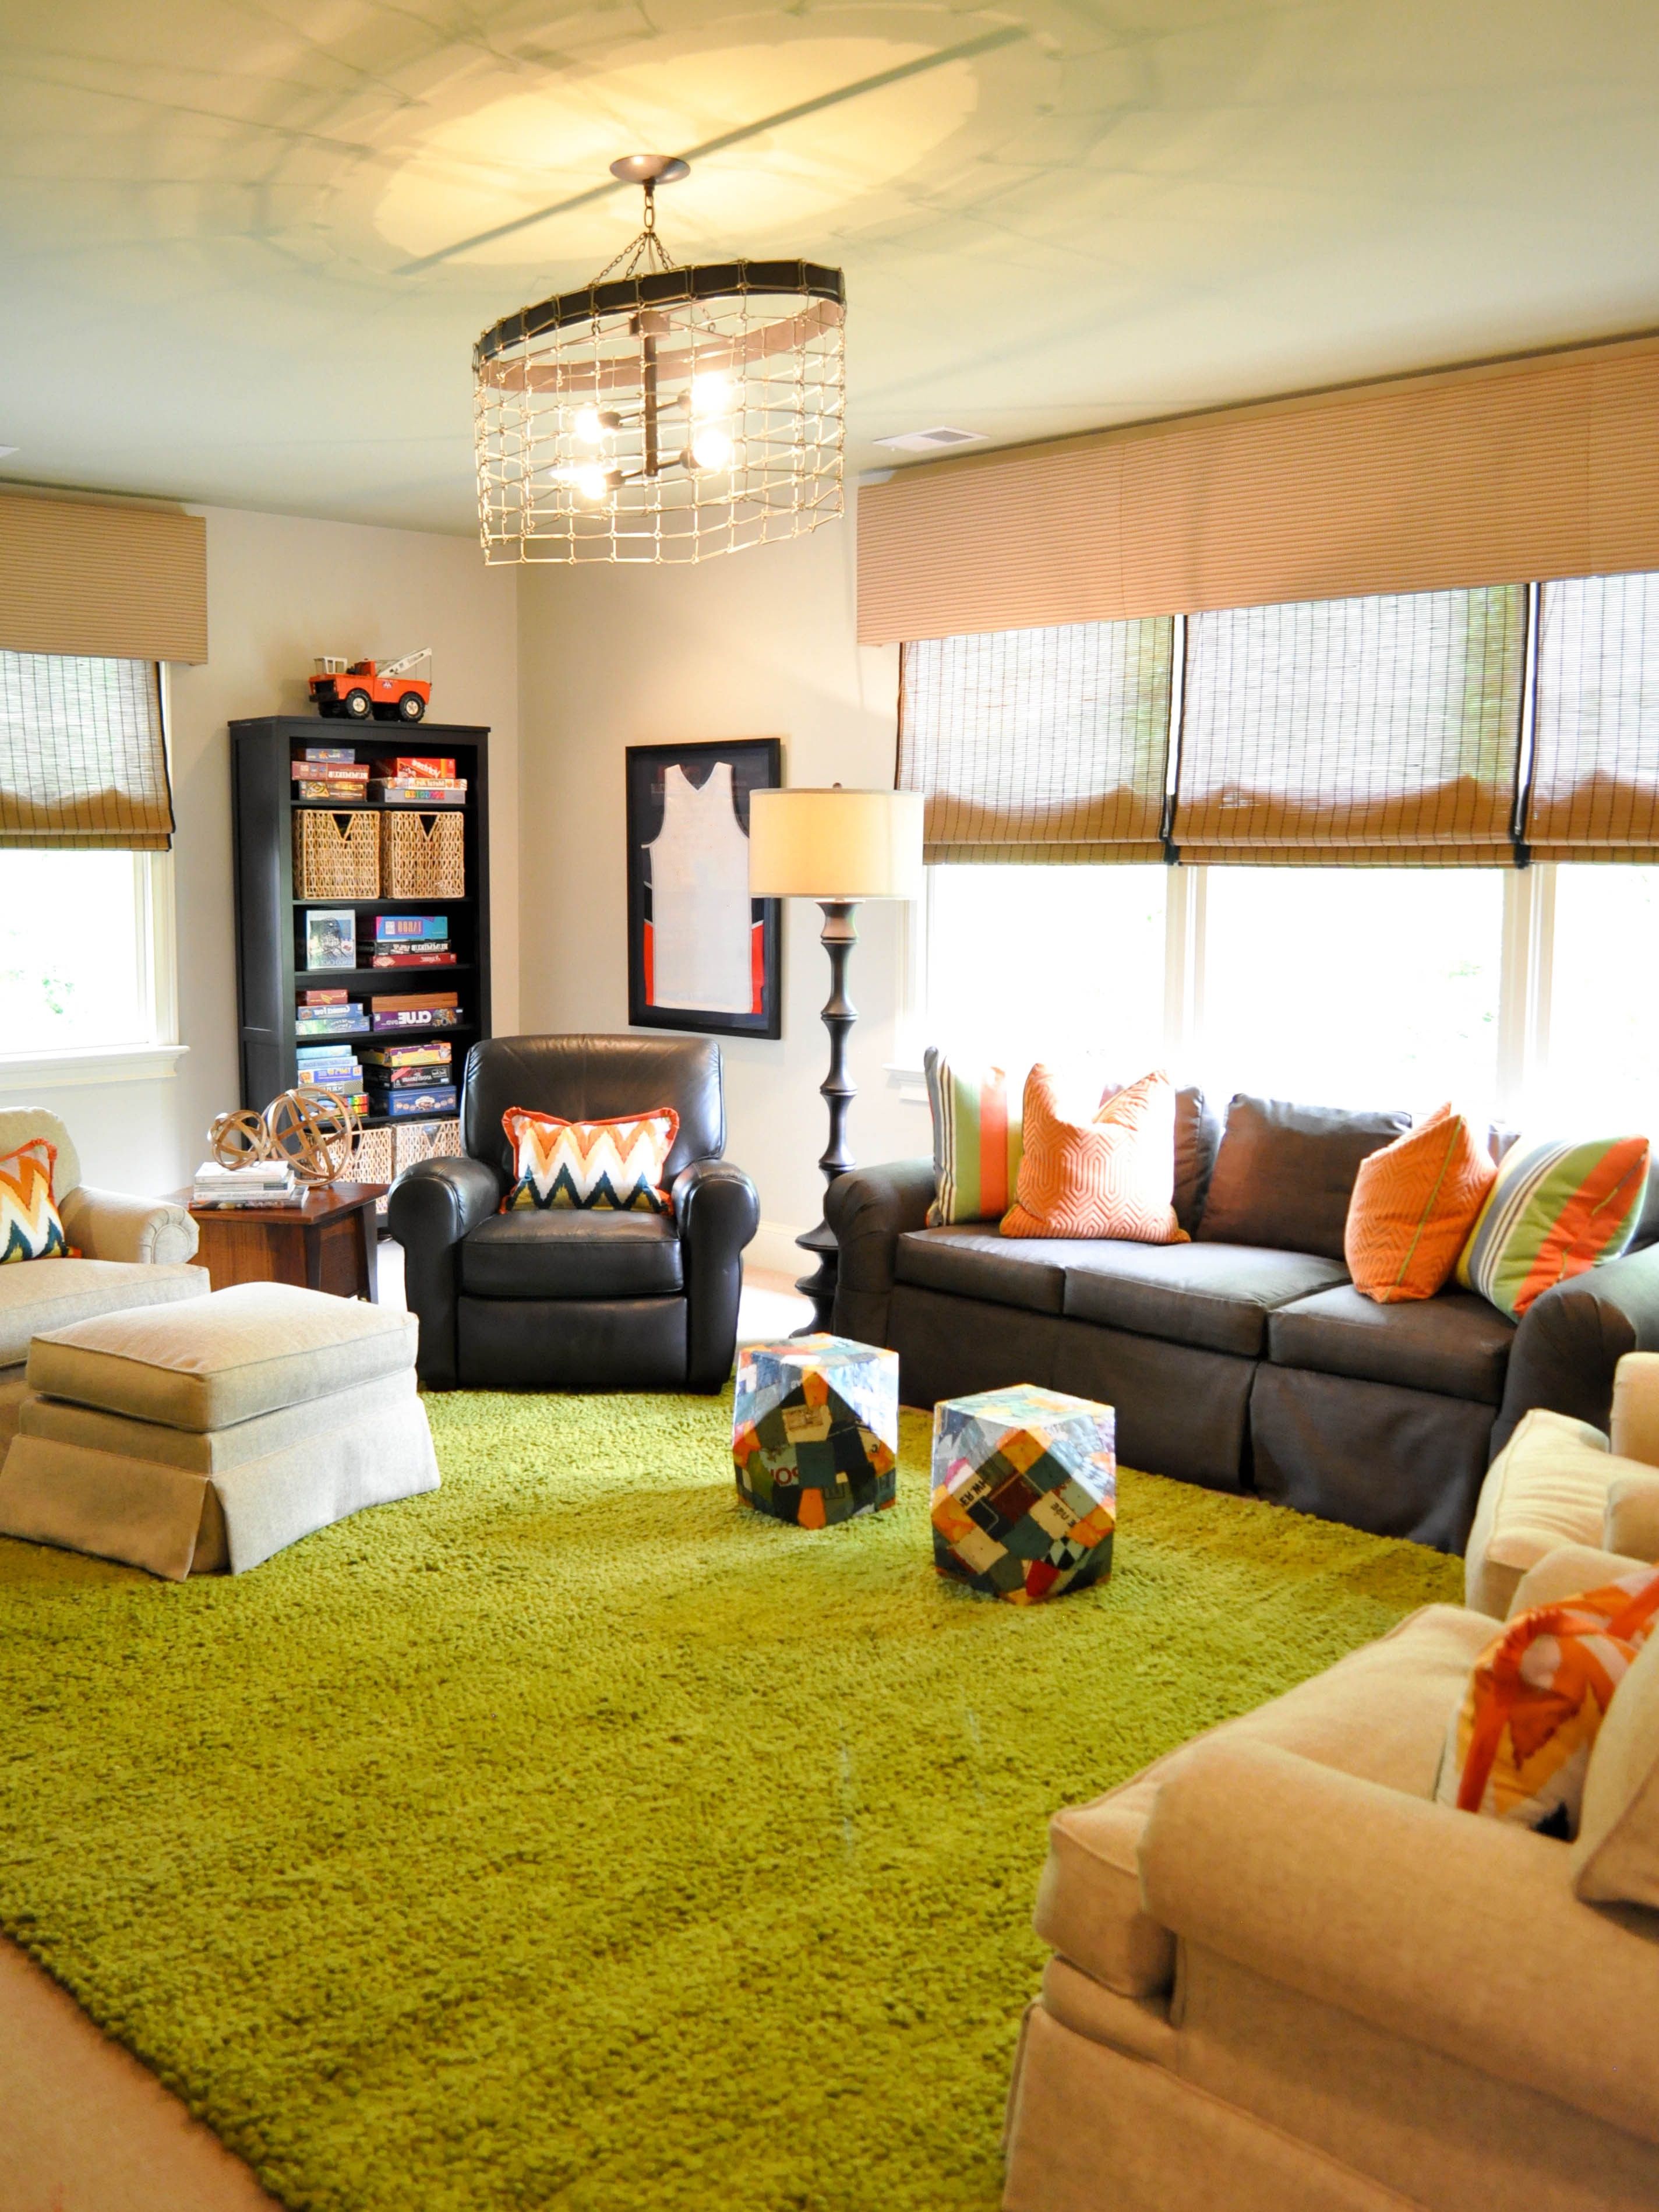 Living Room And Playroom Decor In One Room Combo (View 20 of 30)